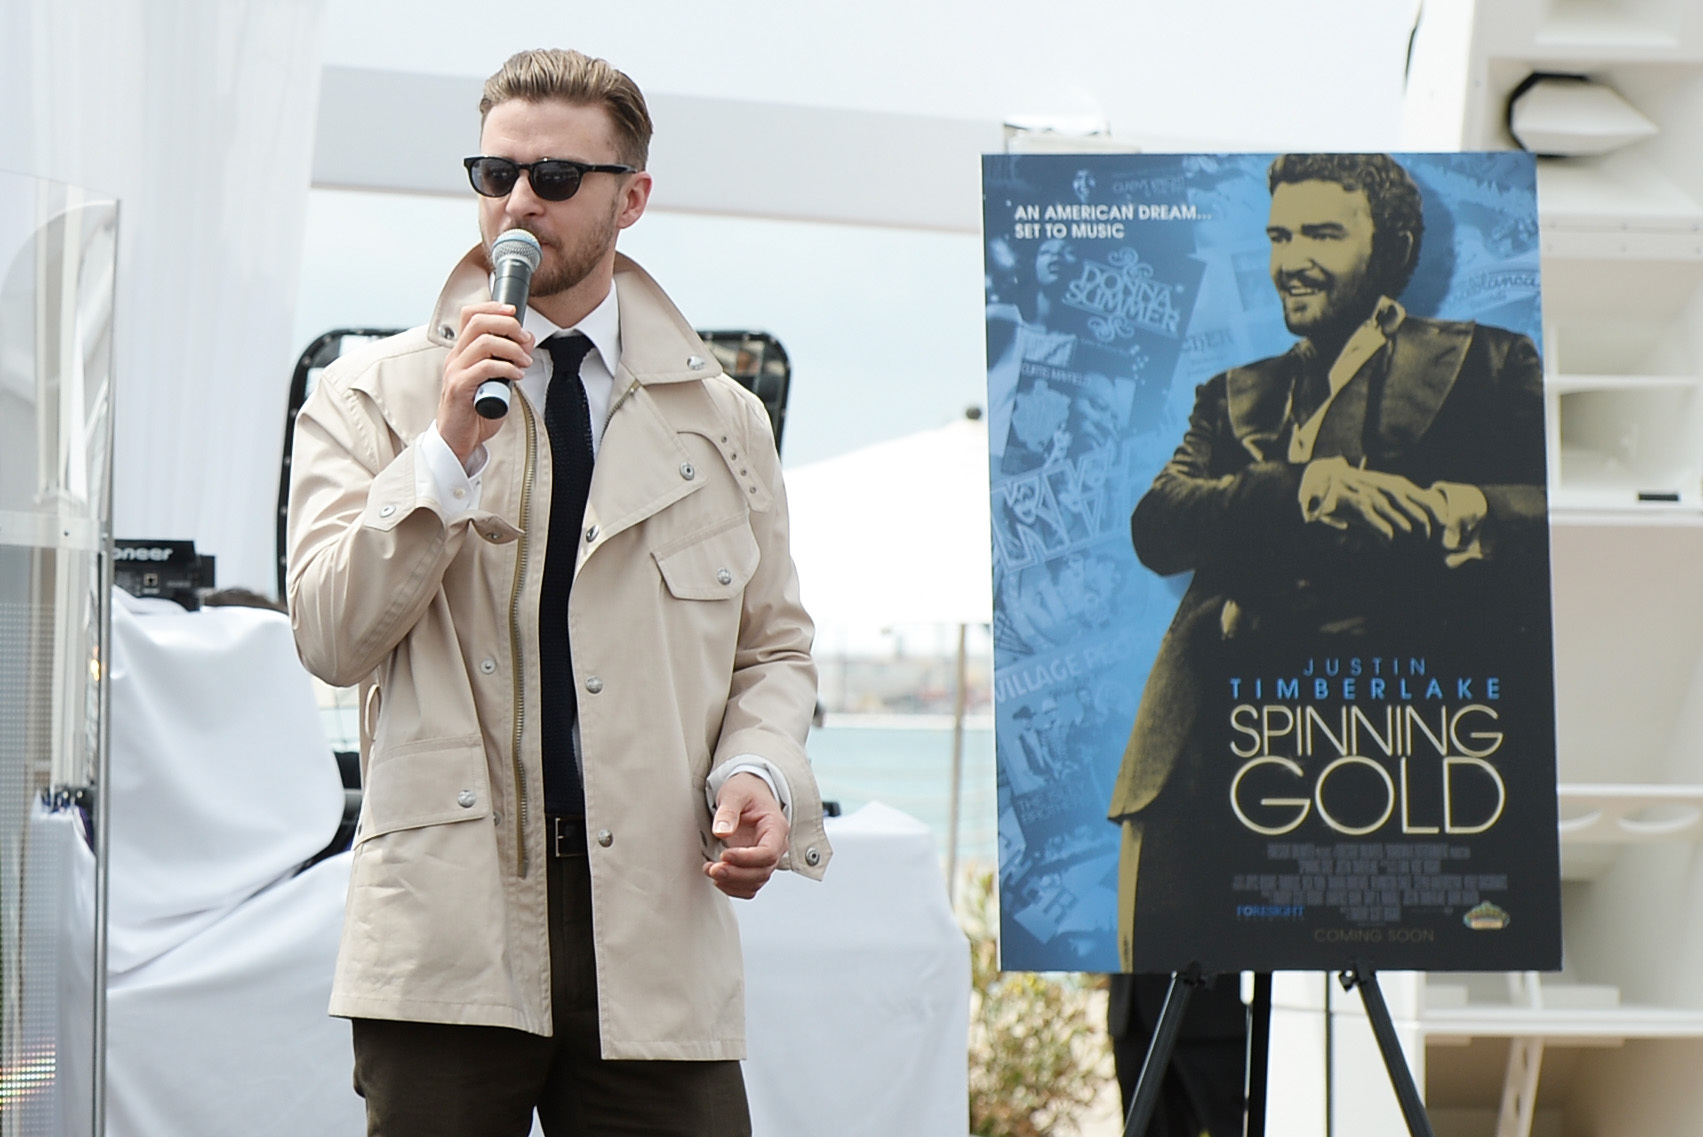 Justin Timberlake at event of Spinning Gold